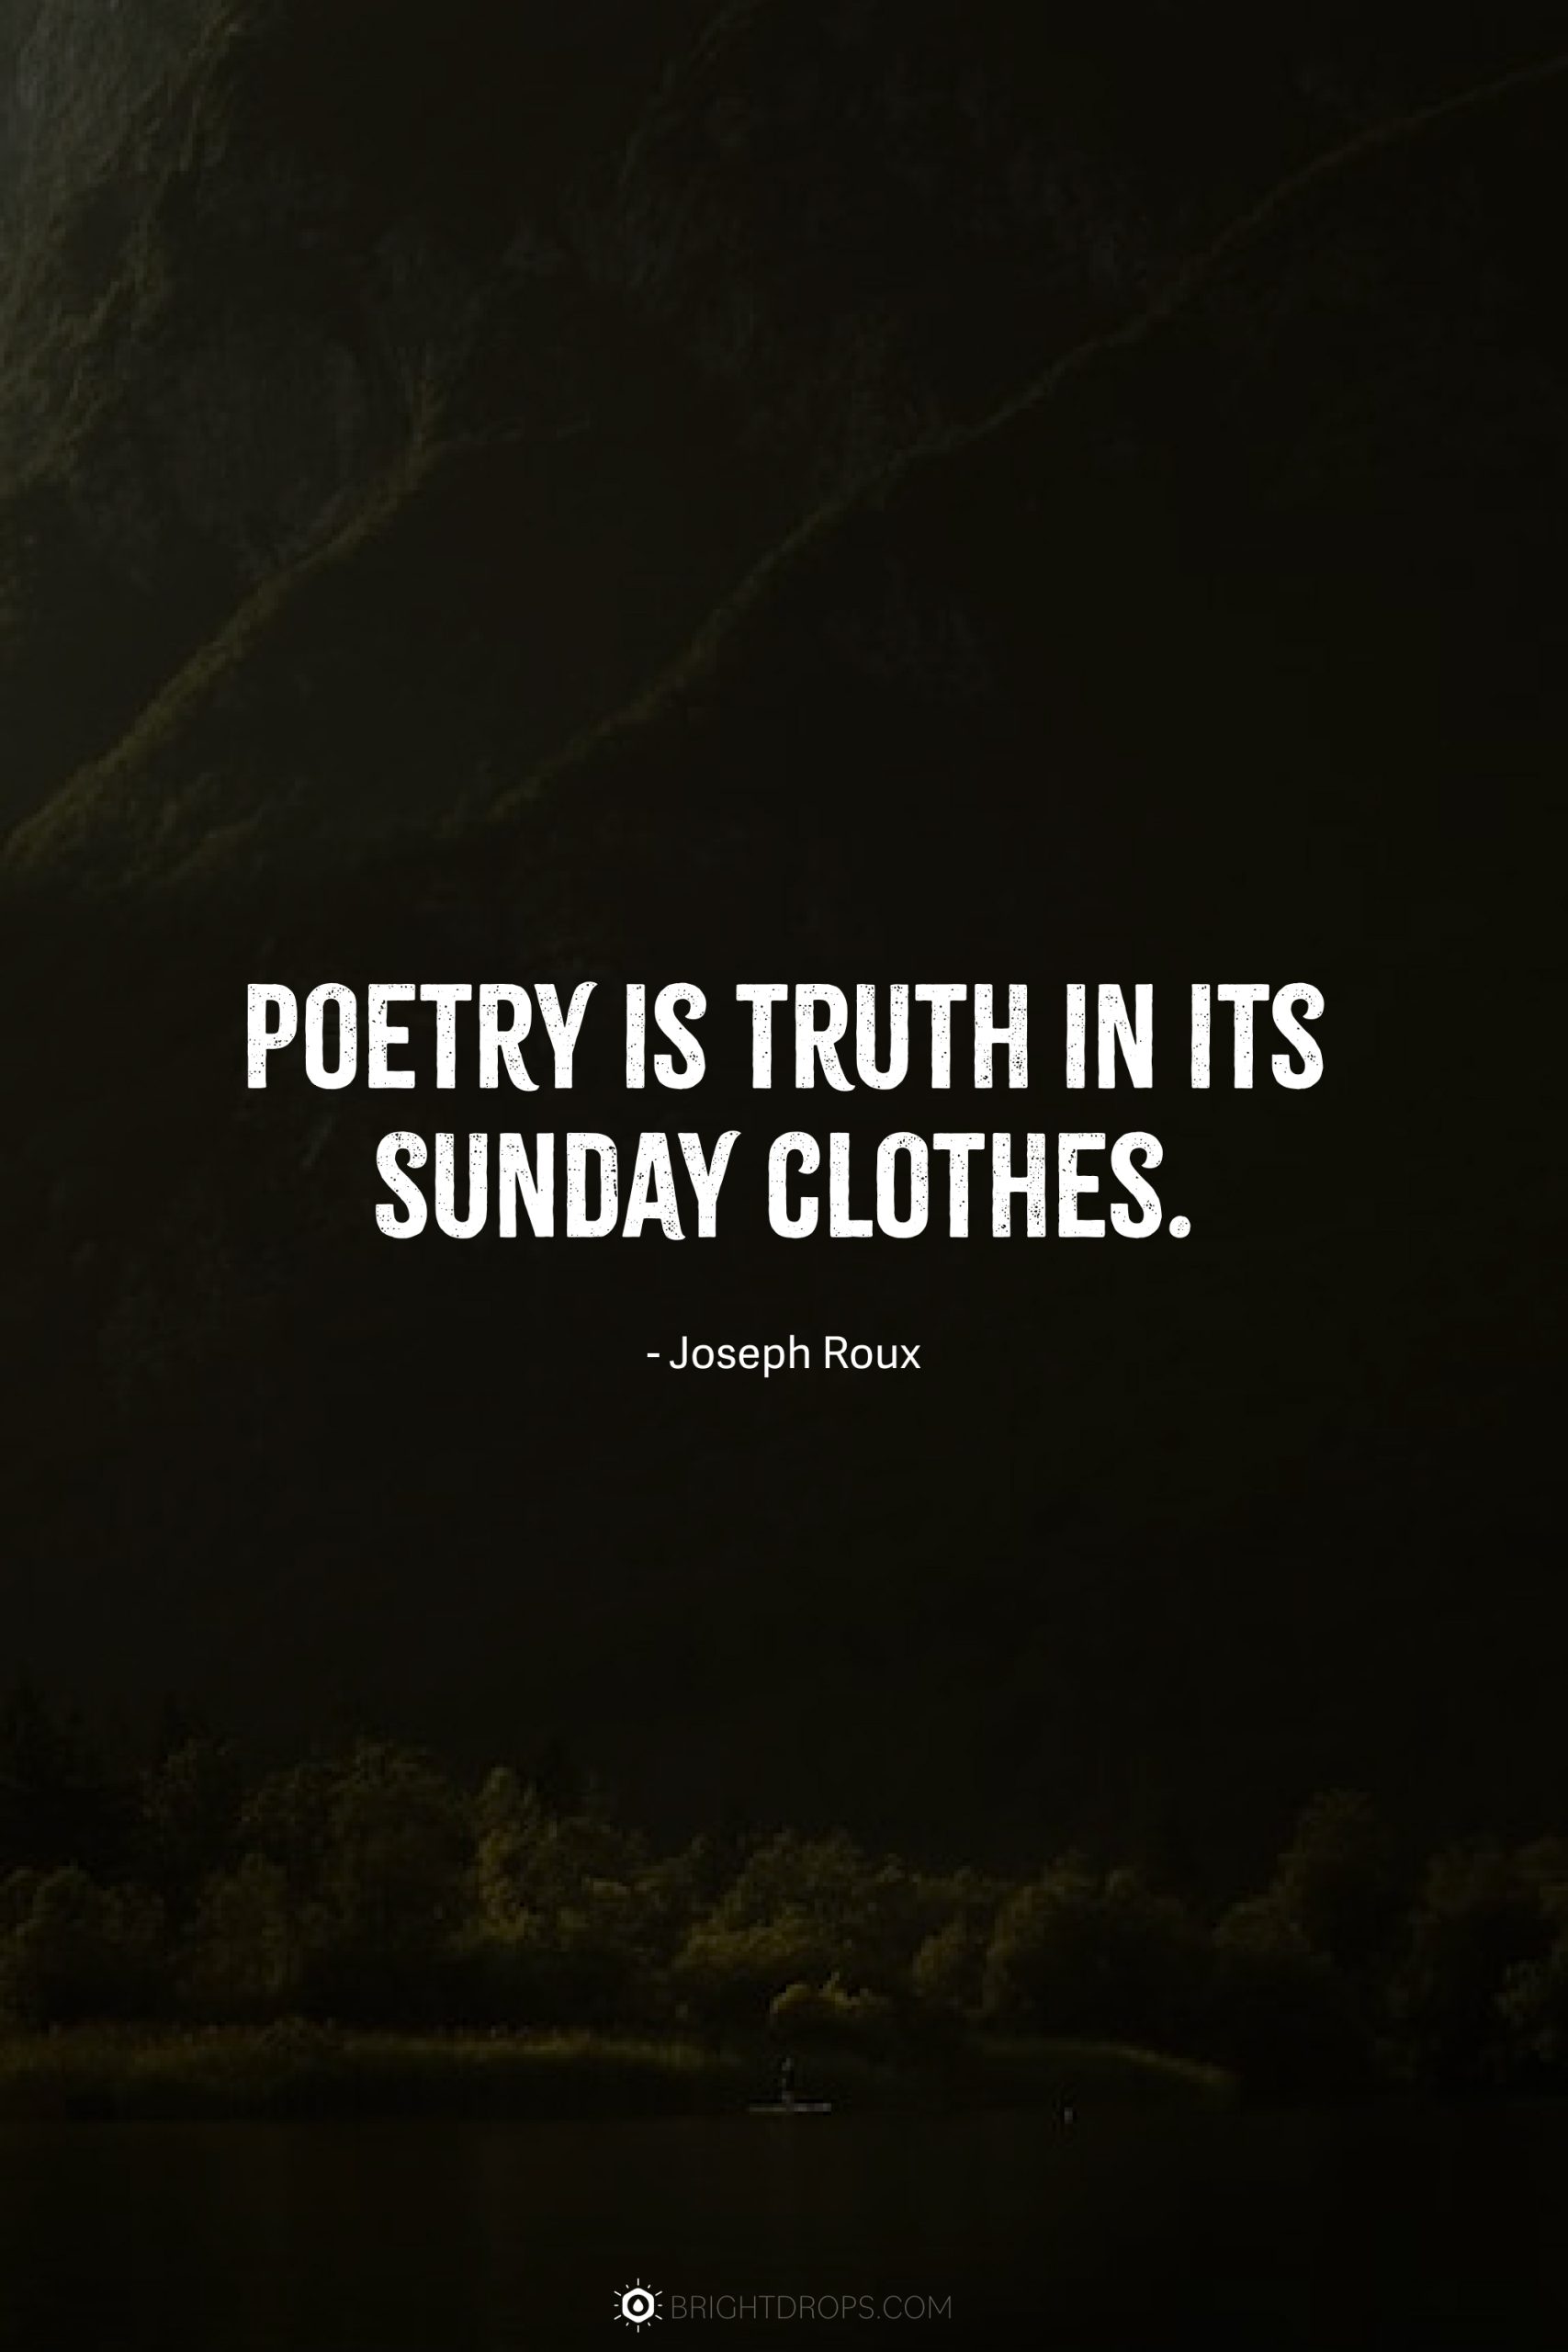 Poetry is truth in its Sunday clothes.